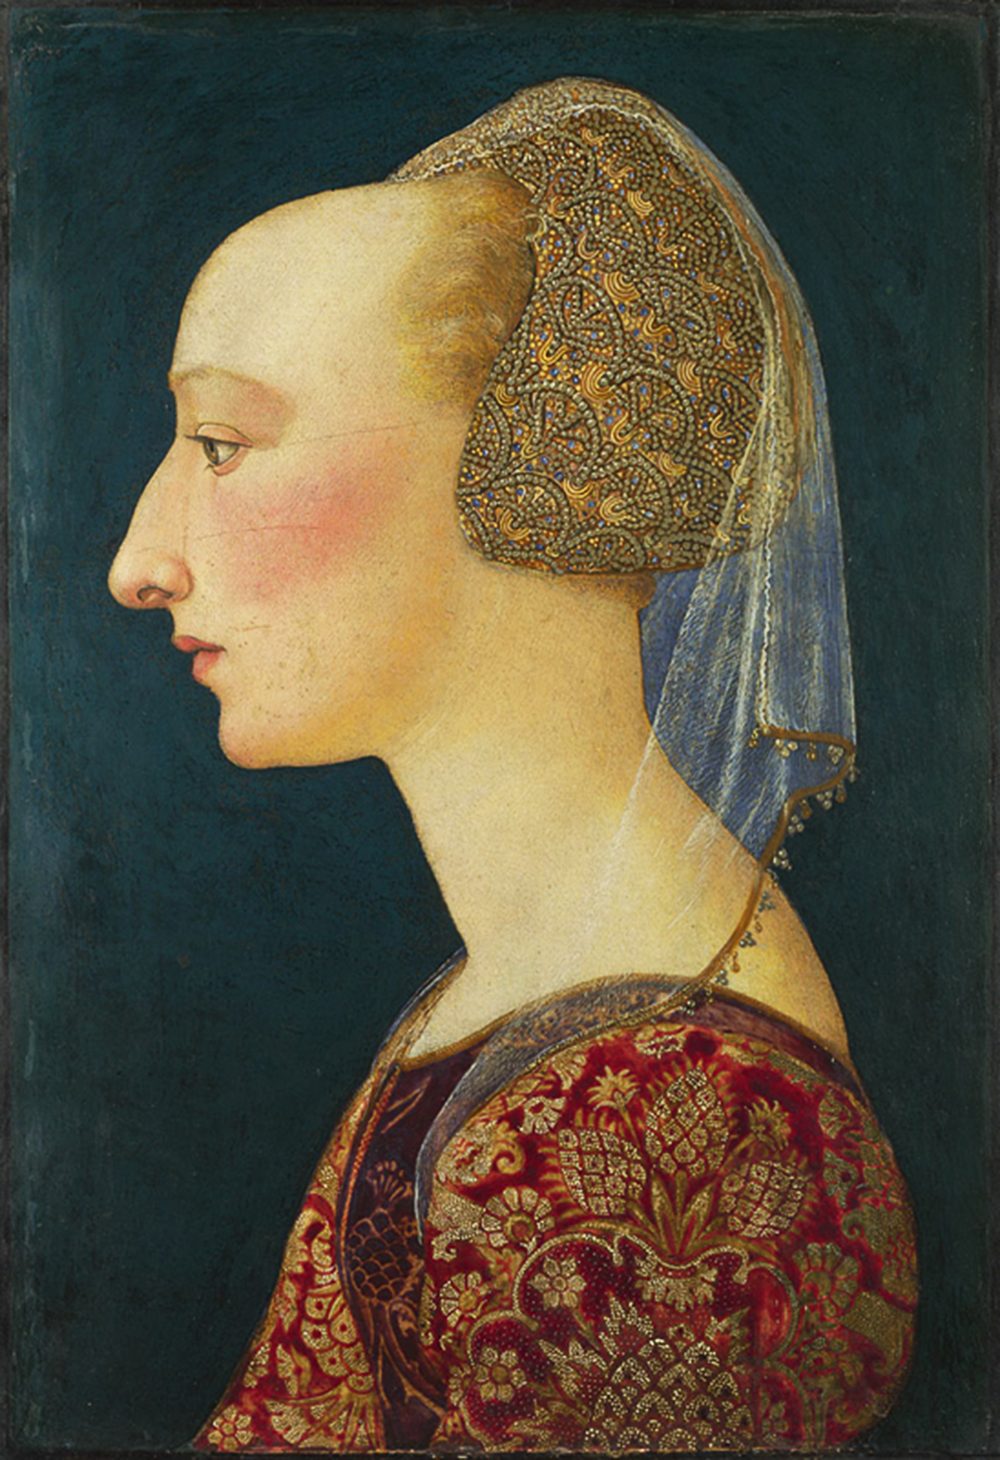 This is a painting of a woman with a headdress made of red and gold cloth. She has blonde hair collected in the headdress. Her forehead is naturally high, as if it's been plucked.